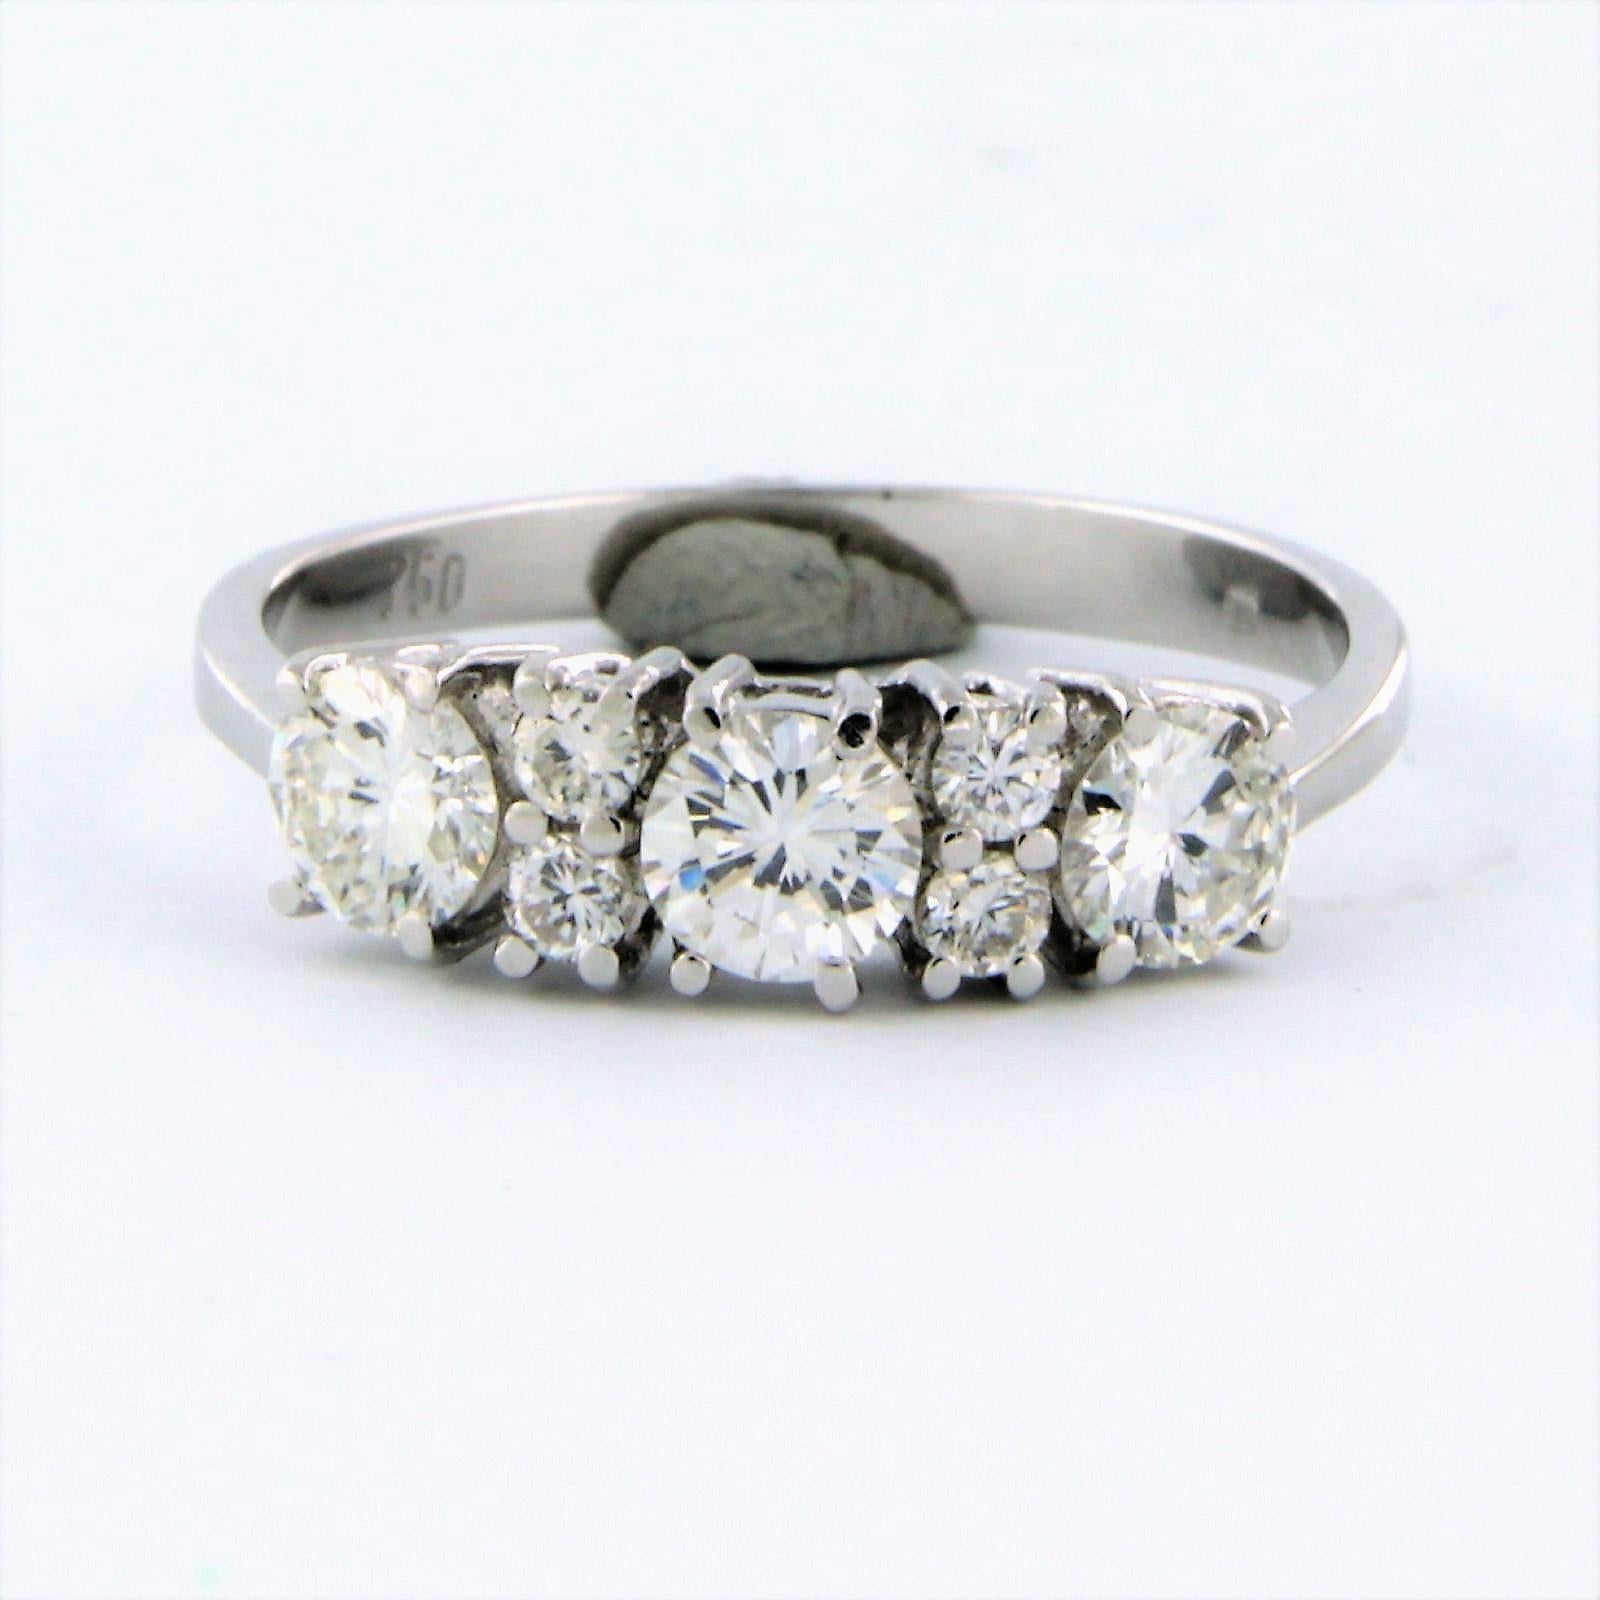 18k white gold ring with brilliant cut diamonds 1.00 ct - F/G - VS/SI - ring size U.S. 7.25 - EU. 17.5(55)

detailed description:

the top of the ring is 5.2 mm wide

weight 2.5 grams

ring size  U.S. 7.25 - EU. 17.5(55), ring can be enlarged or